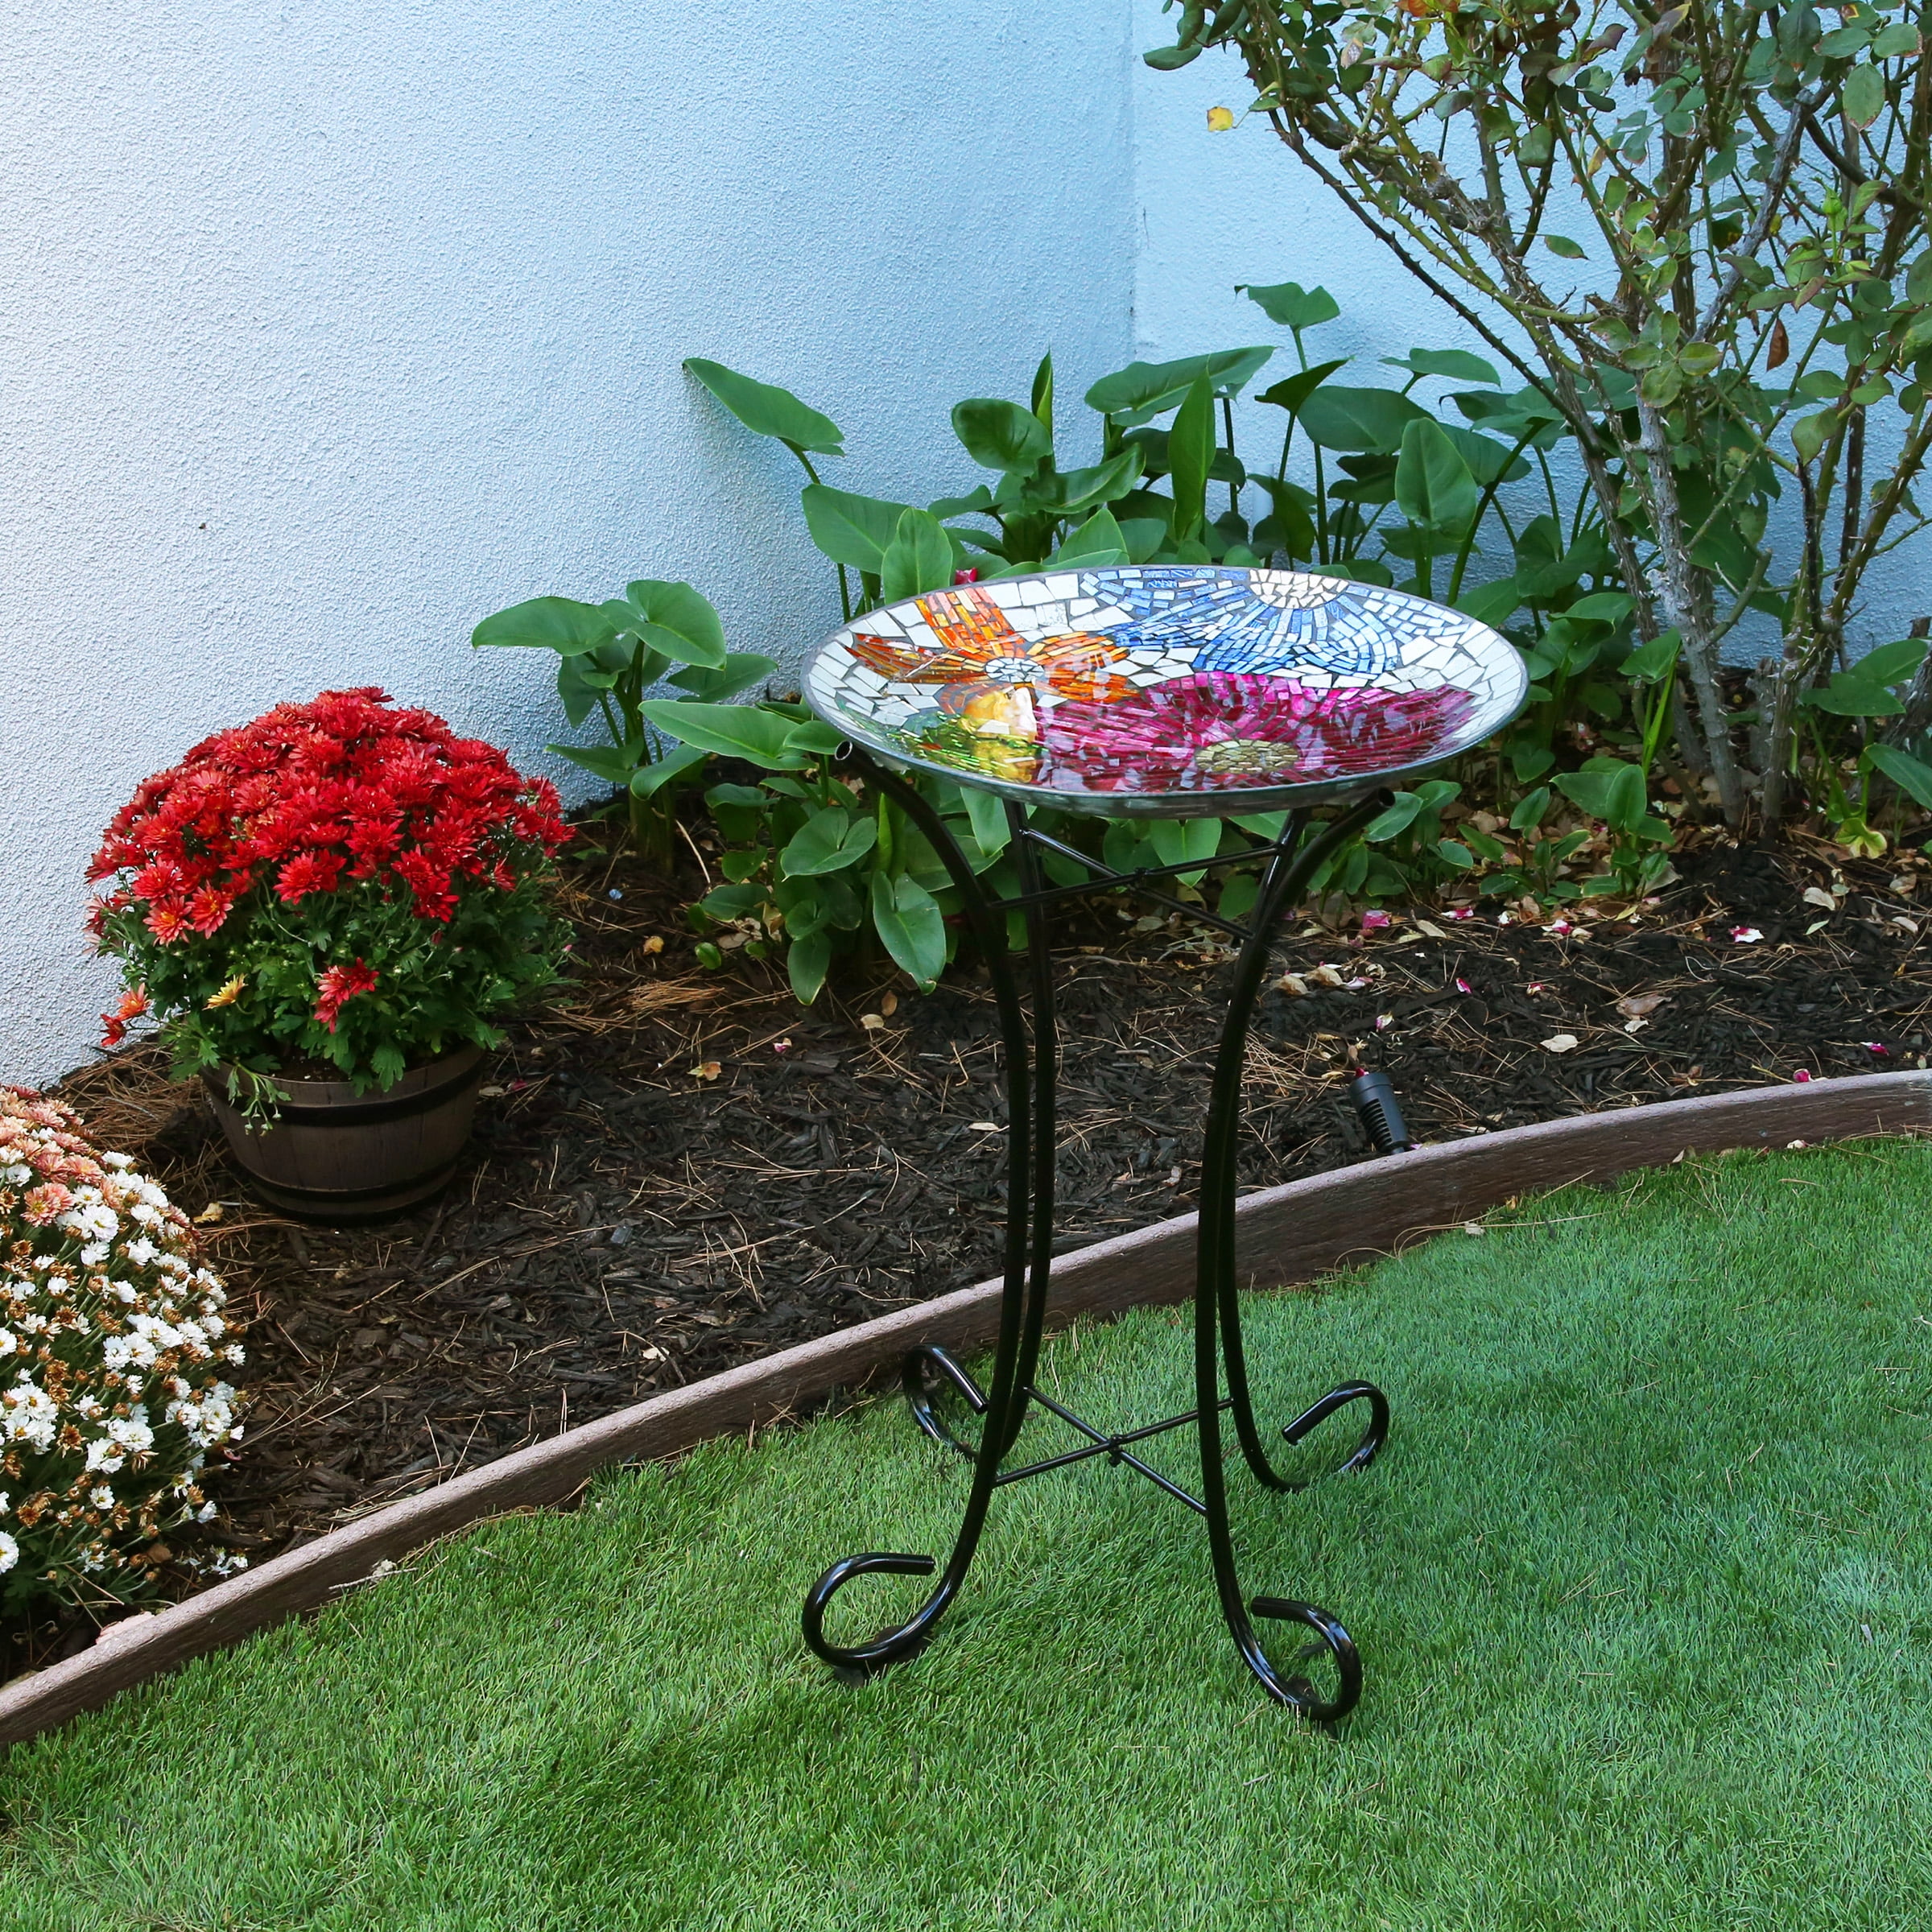 Picture of Alpine HMD106A 18 in. Floral Metallic Mosaic Glass Birdbath with Metal Stand